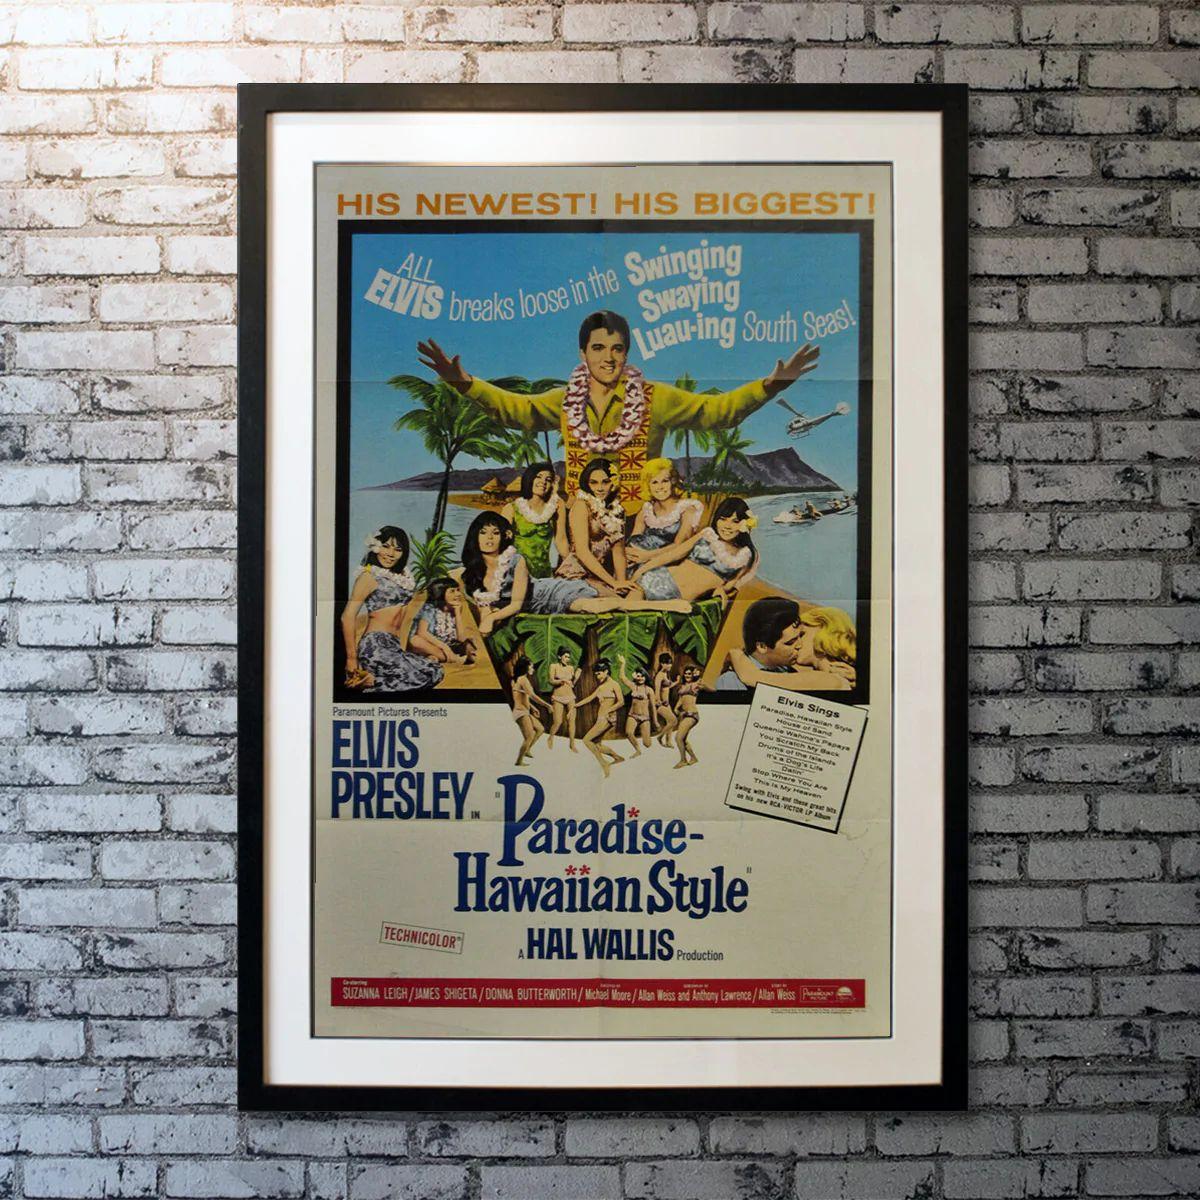 Paradise - Hawaiian Style, Unframed Poster, 1966

Rick Richards is a helicopter pilot who wants to set up a charter flying service in Hawaii -- along the way he makes some friends, including a young Hawaiian girl and her father, romances Judy